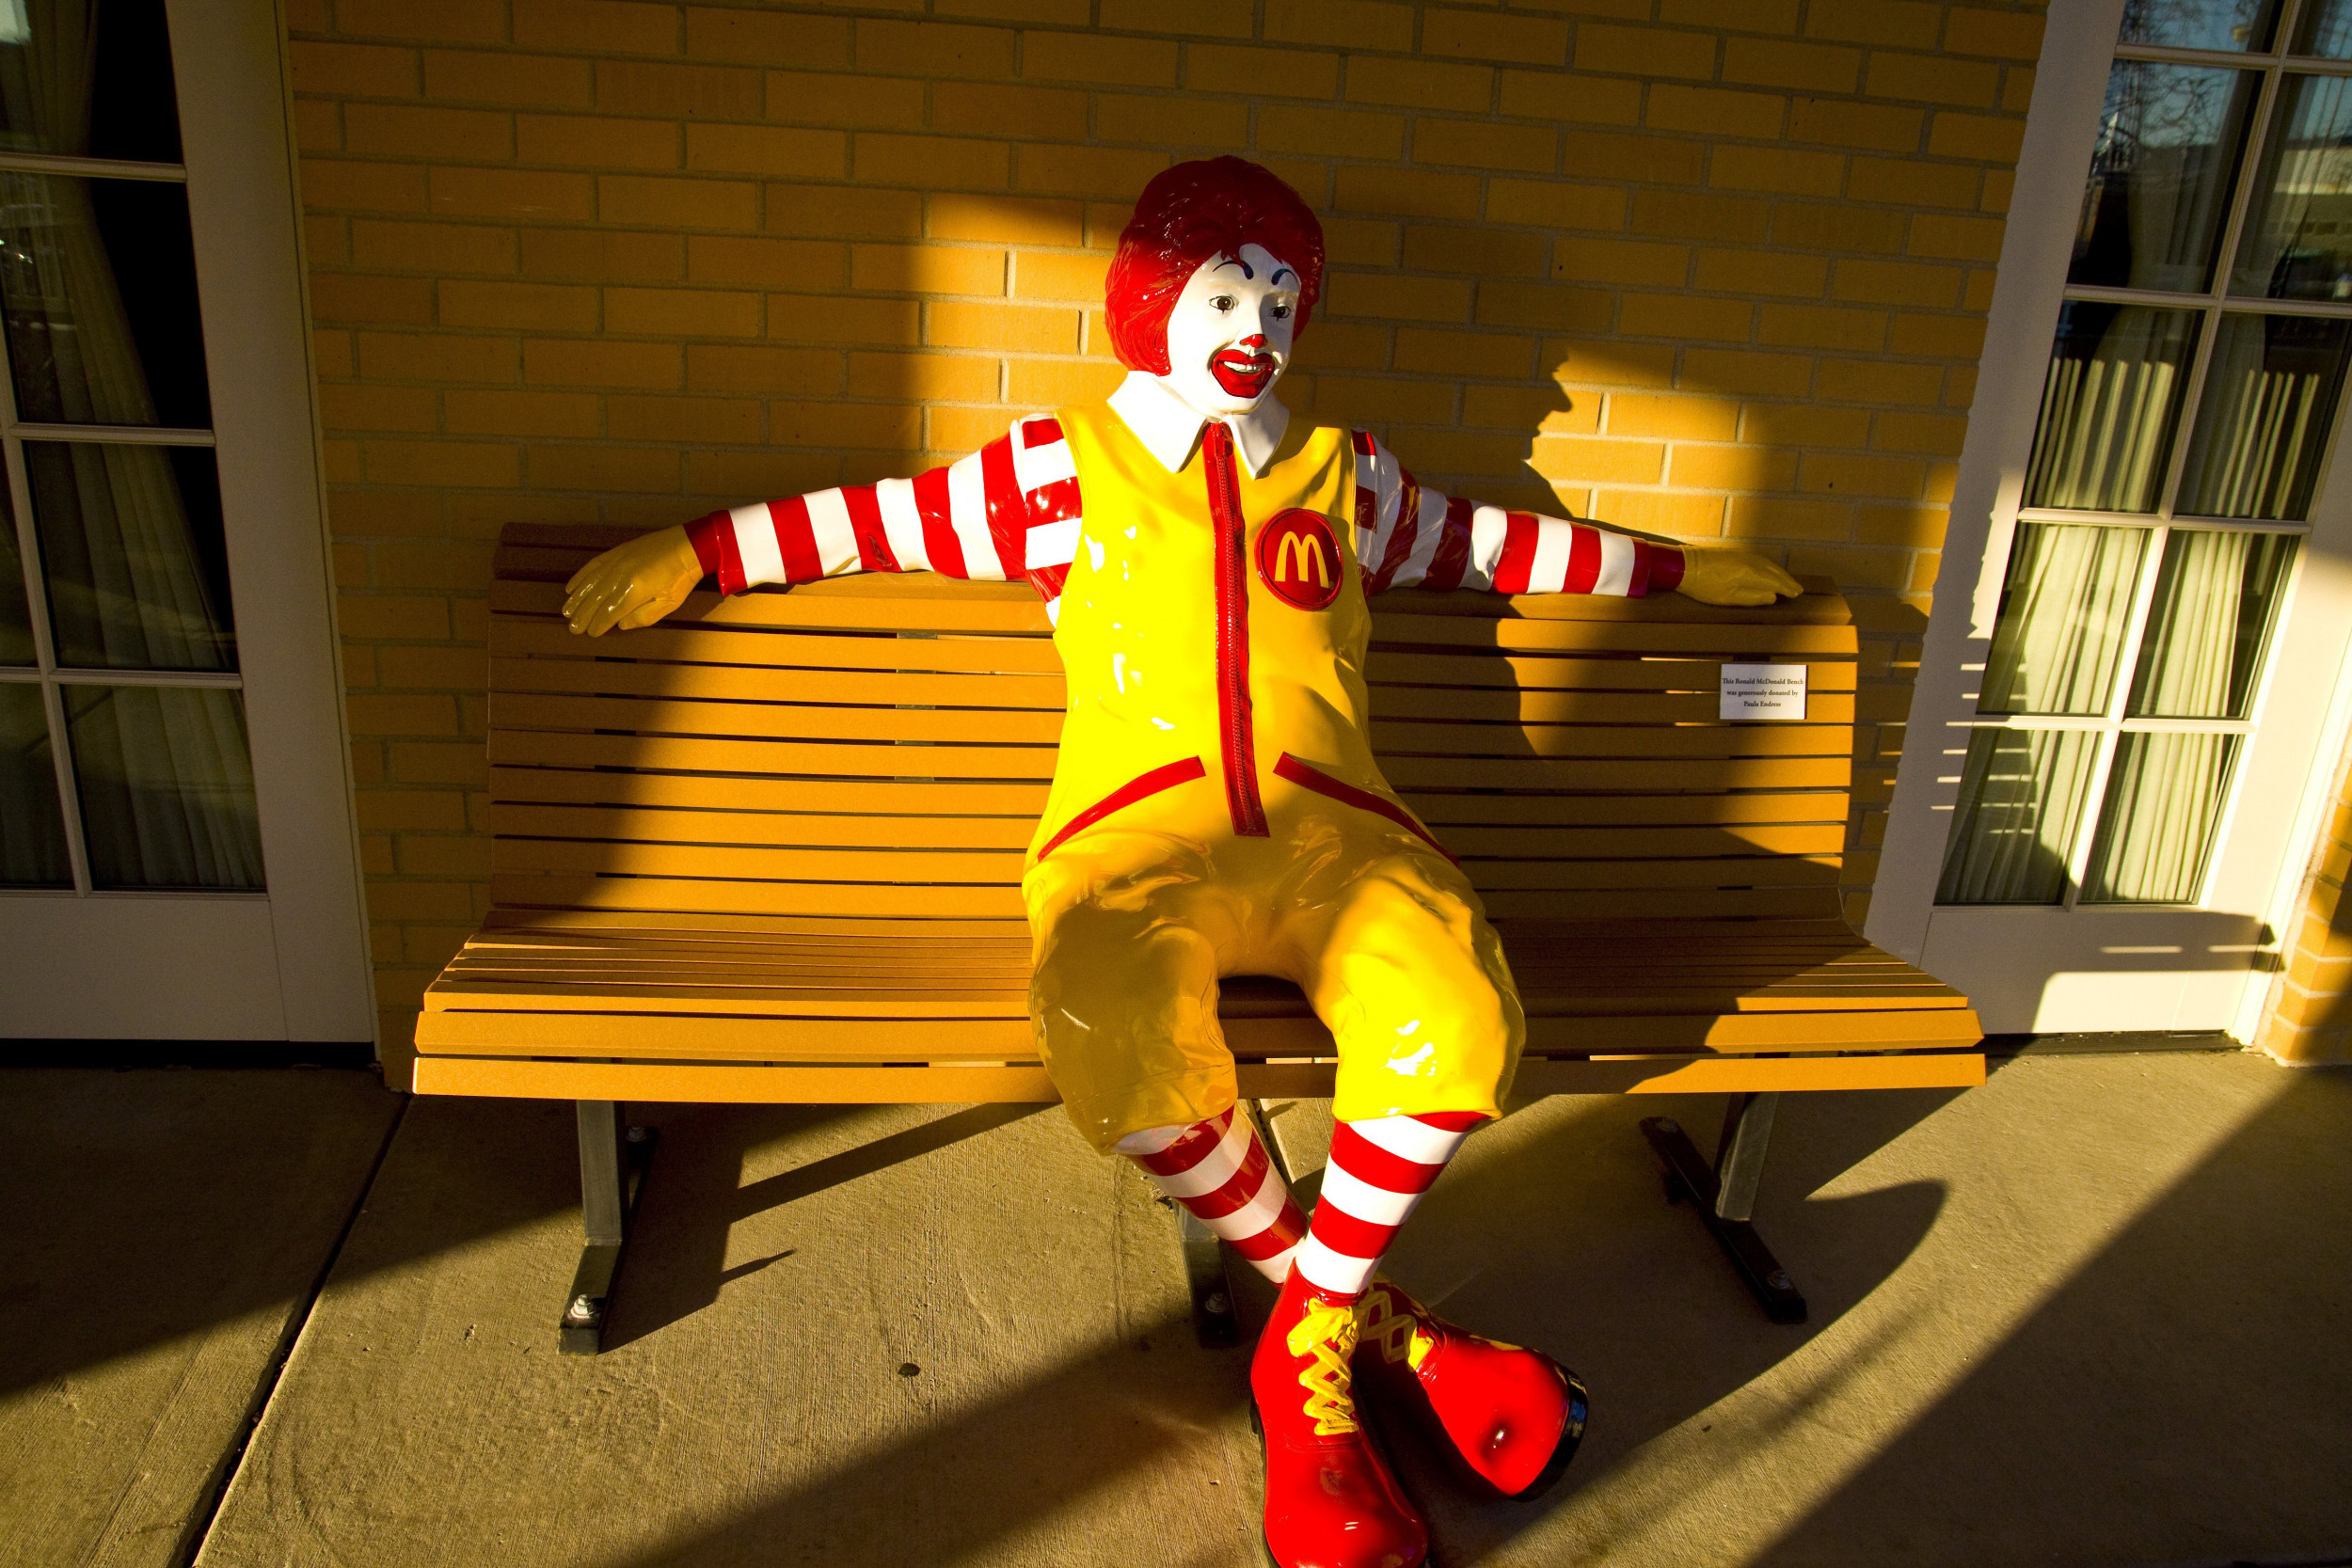 Ronald Mcdonald Bench For Sale Hotsell | head.hesge.ch